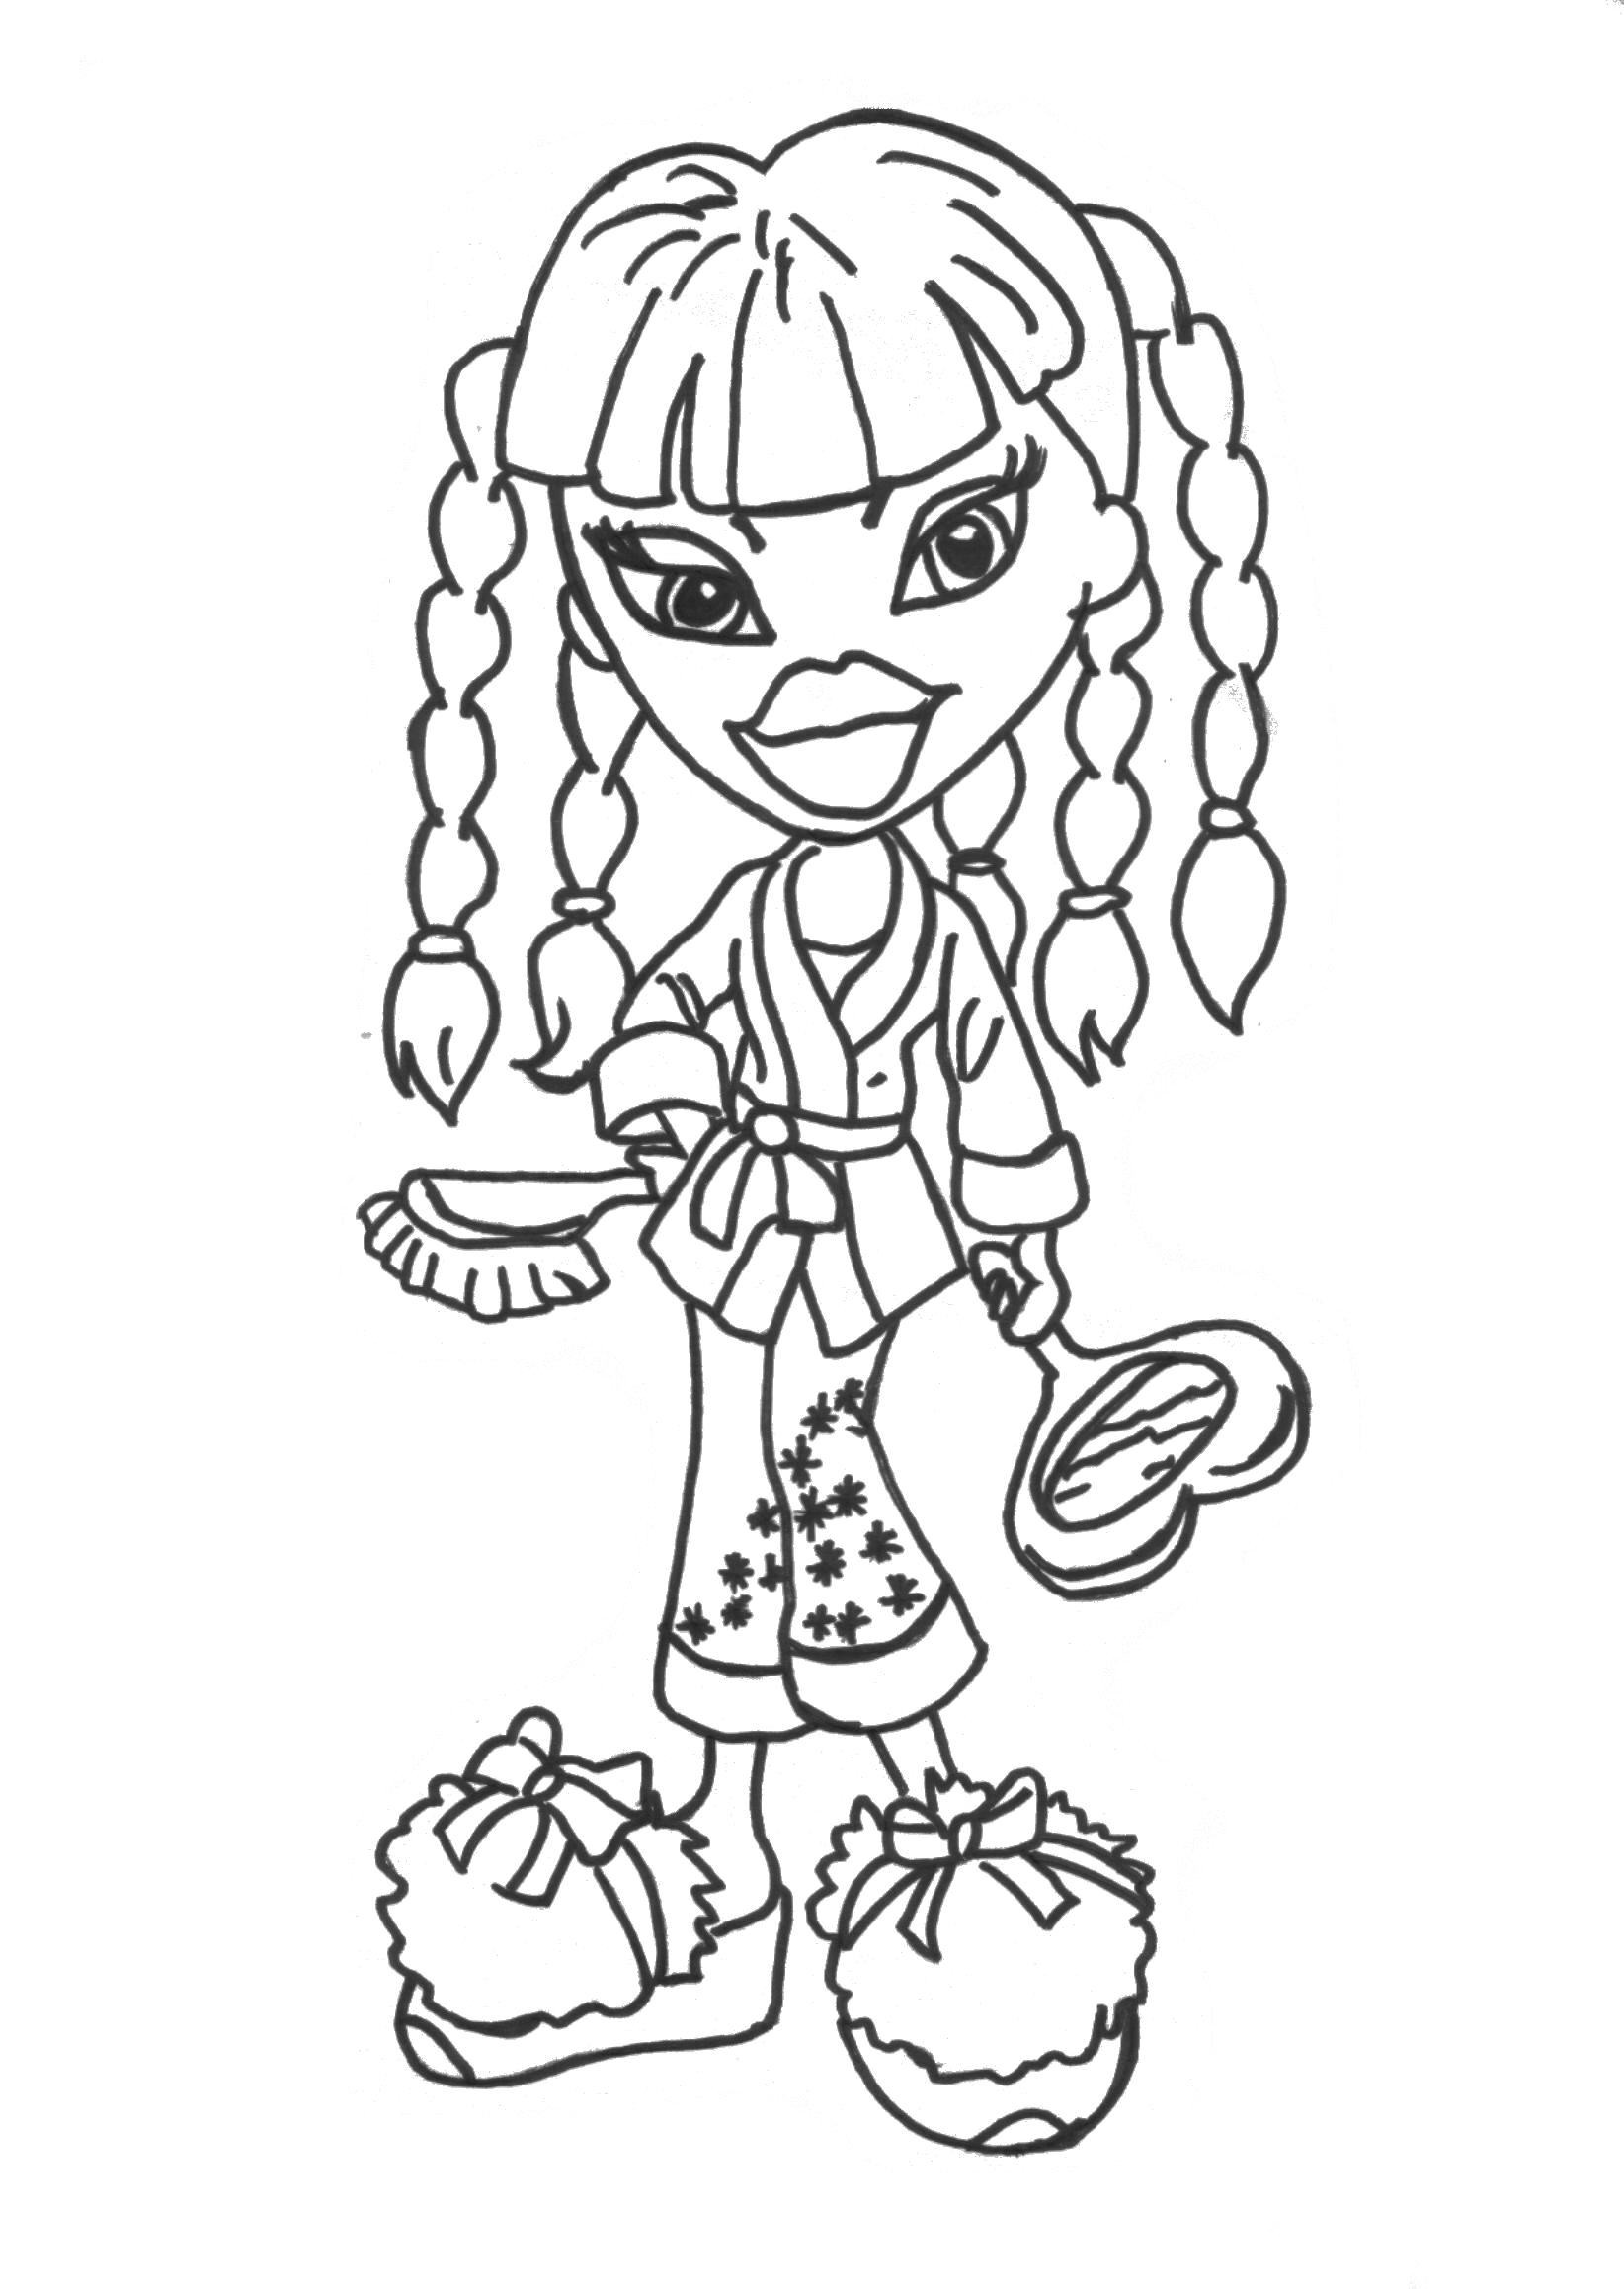 Coloring Sheets For Girls Free Printable
 Free Printable Bratz Coloring Pages For Kids